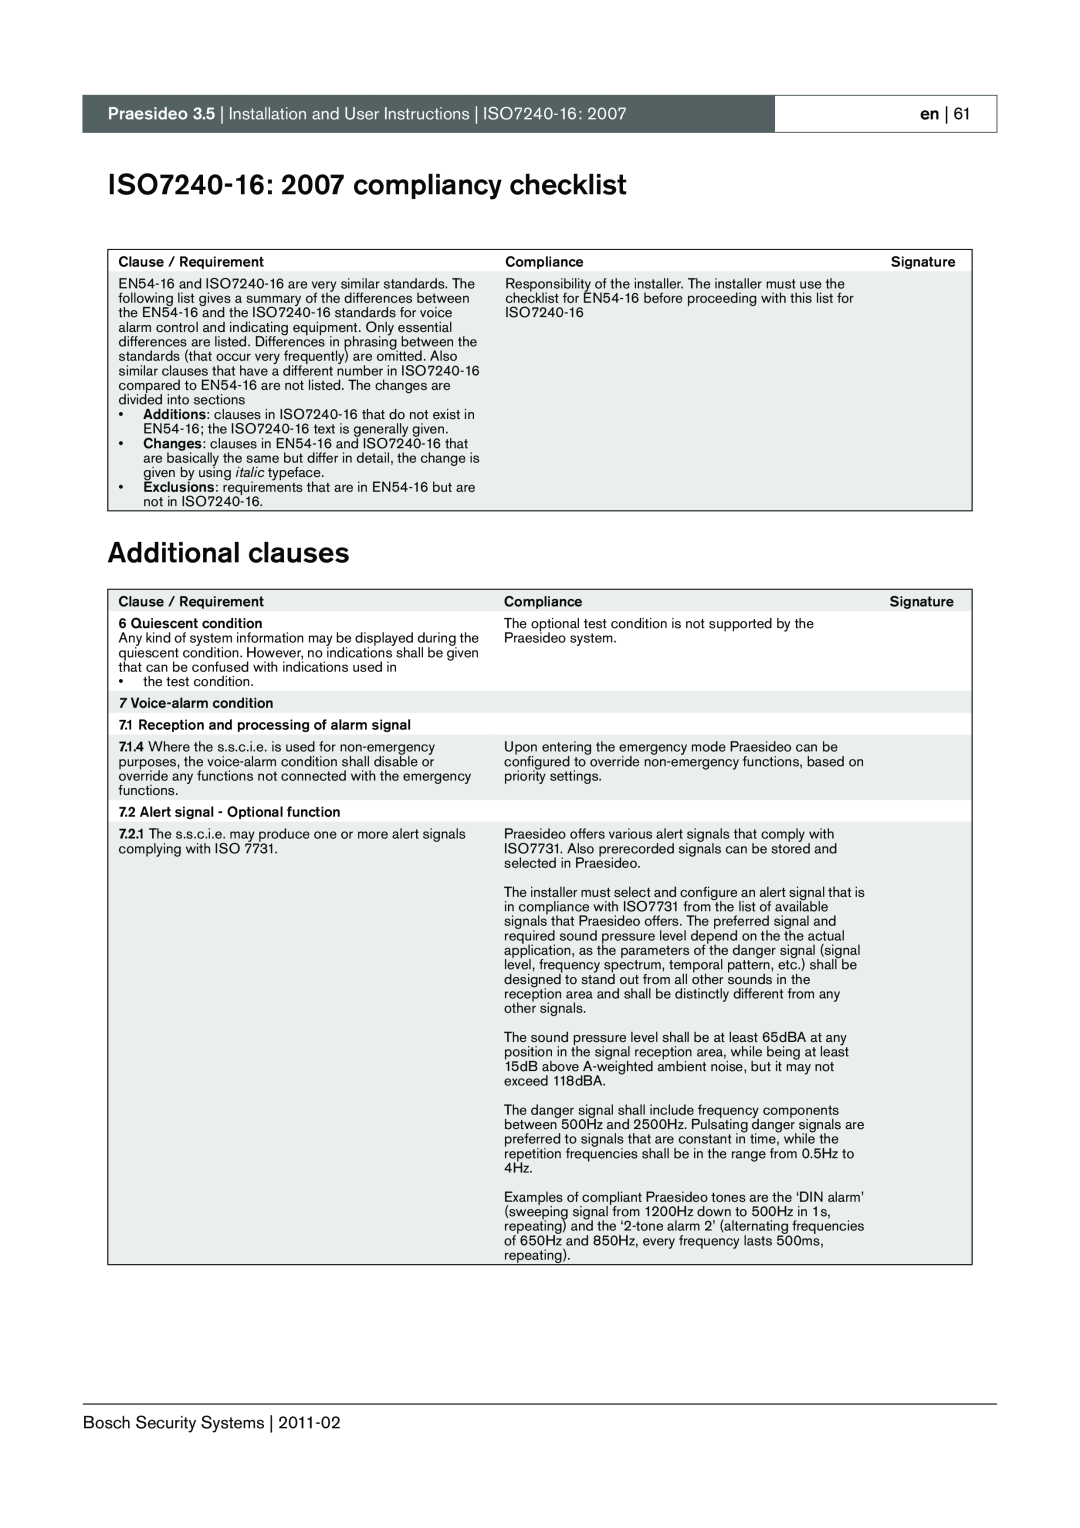 Bosch Appliances 3.5 manual ISO7240-16:2007 compliancy checklist, Additional clauses 